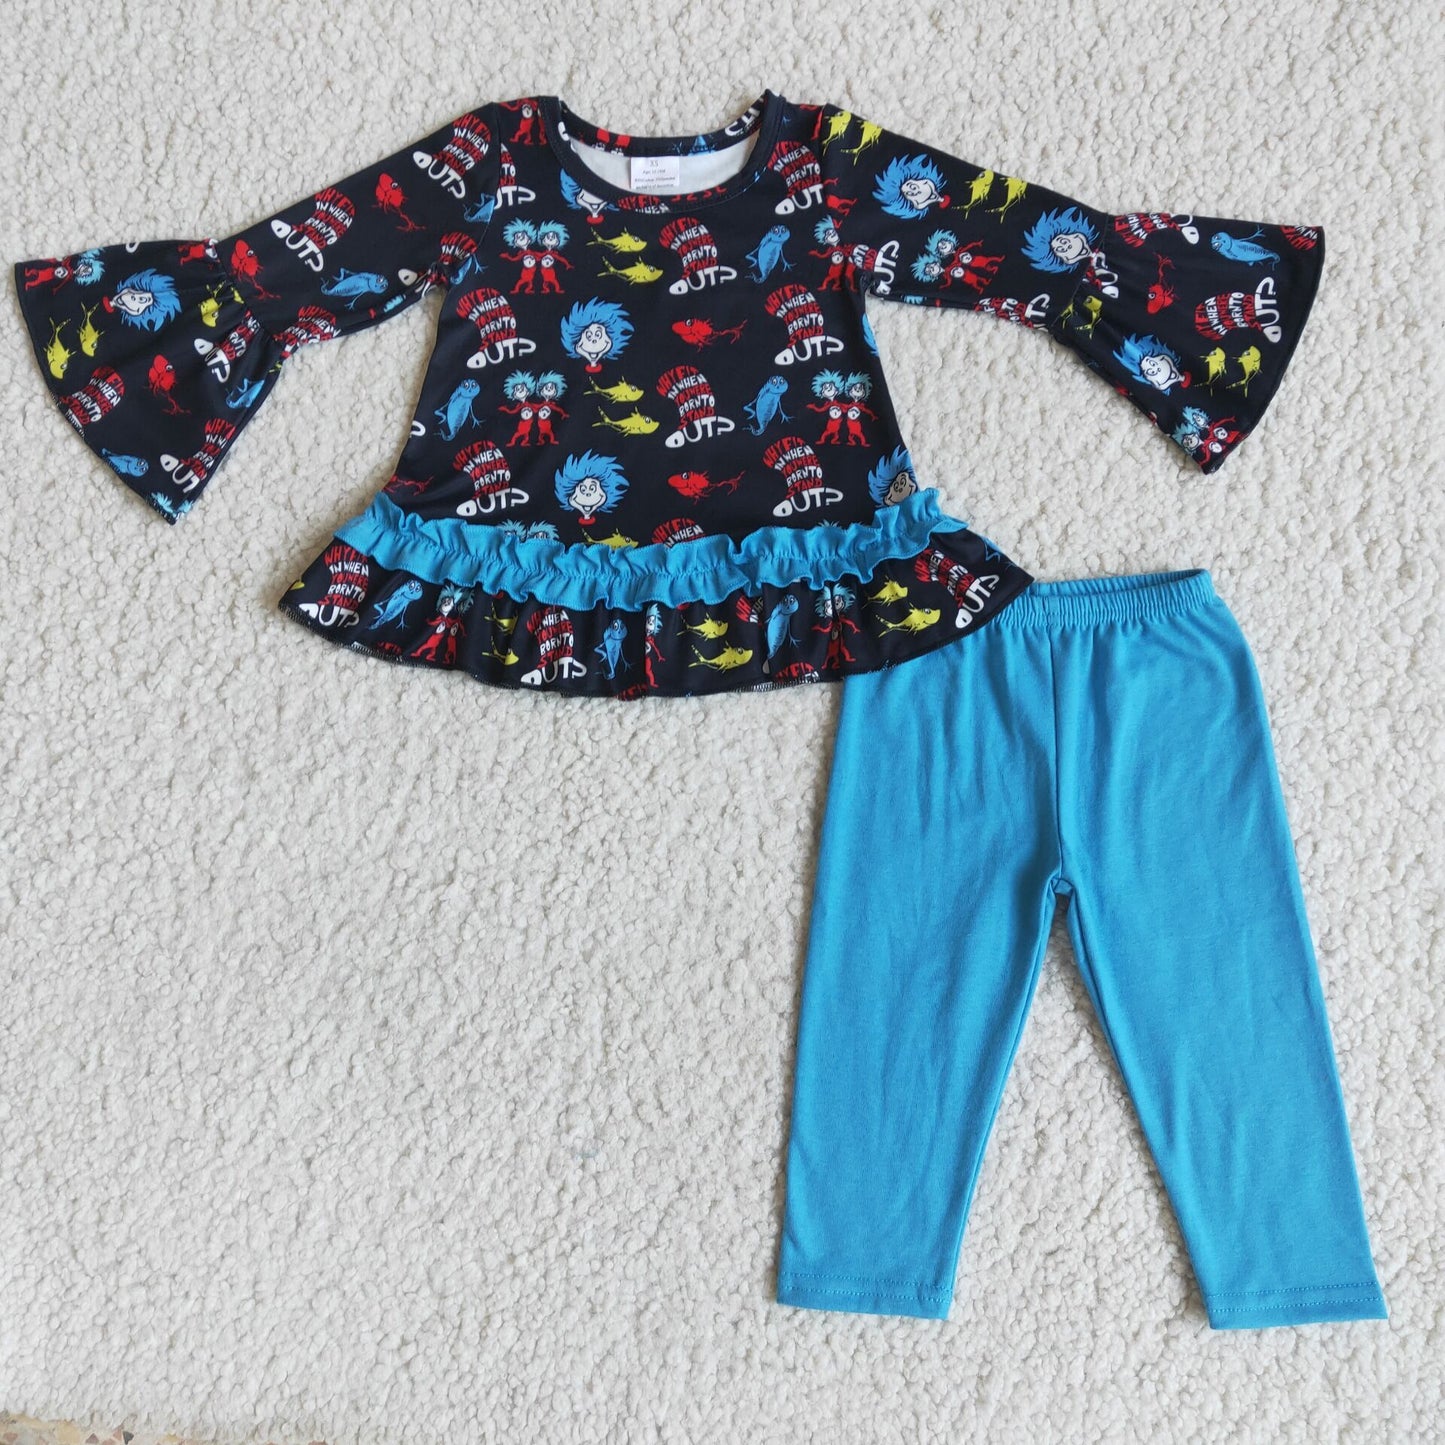 (Promotion)Long sleeve legging pants outfits 6 A10-16